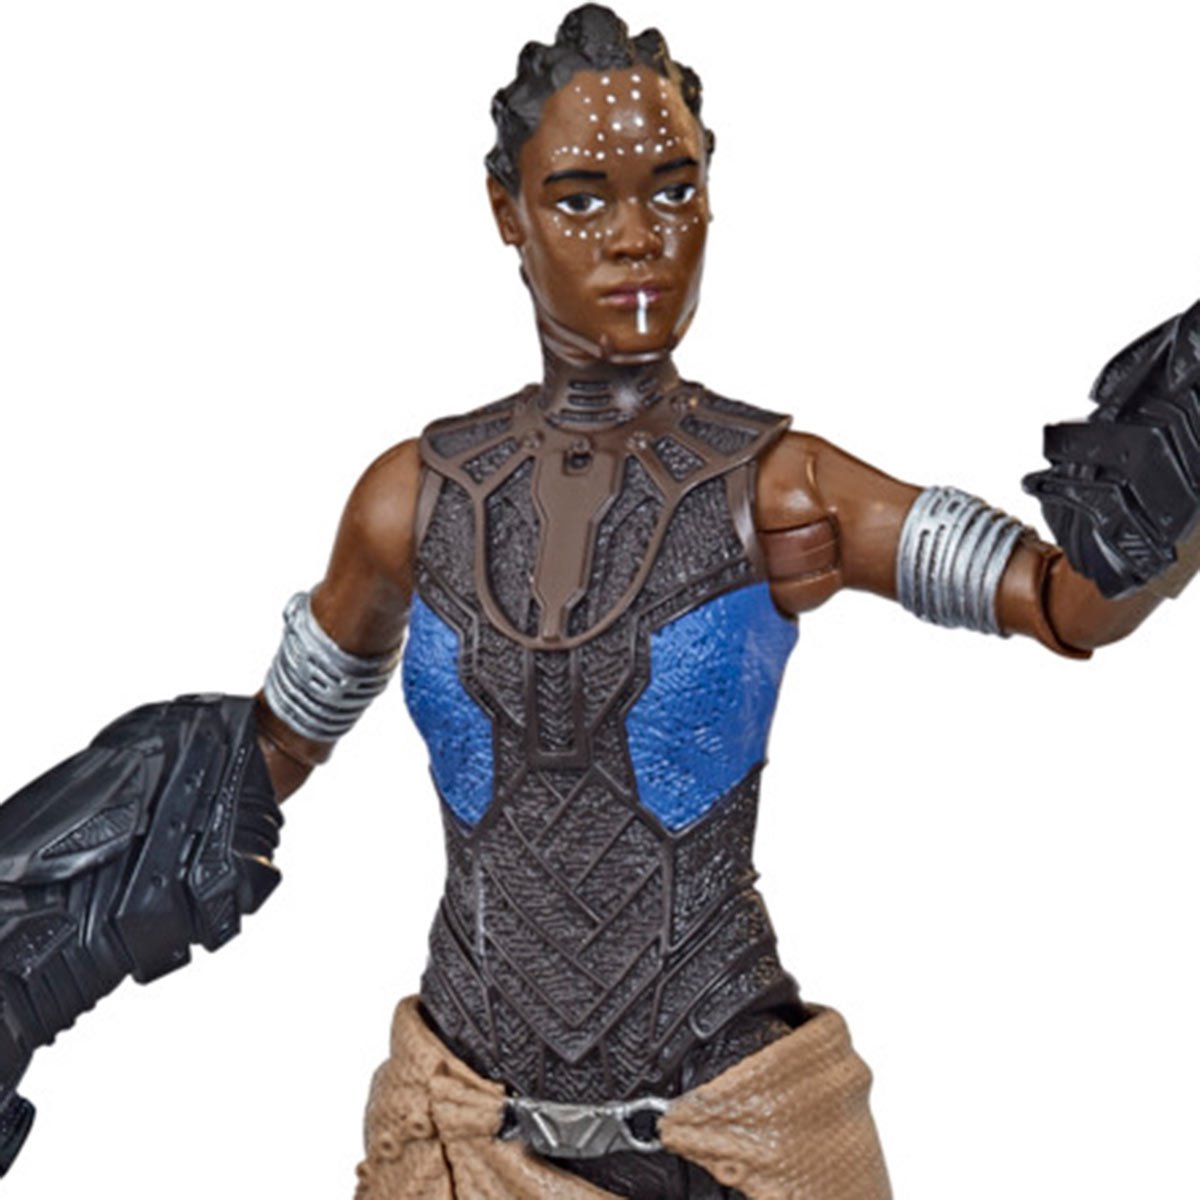 Spider-Man Marvel Studios' Black Panther: Wakanda Forever Titan Hero Series  Shuri Toy, 12-Inch-Scale Action Figure, Marvel Toys Kids Ages 4 and Up